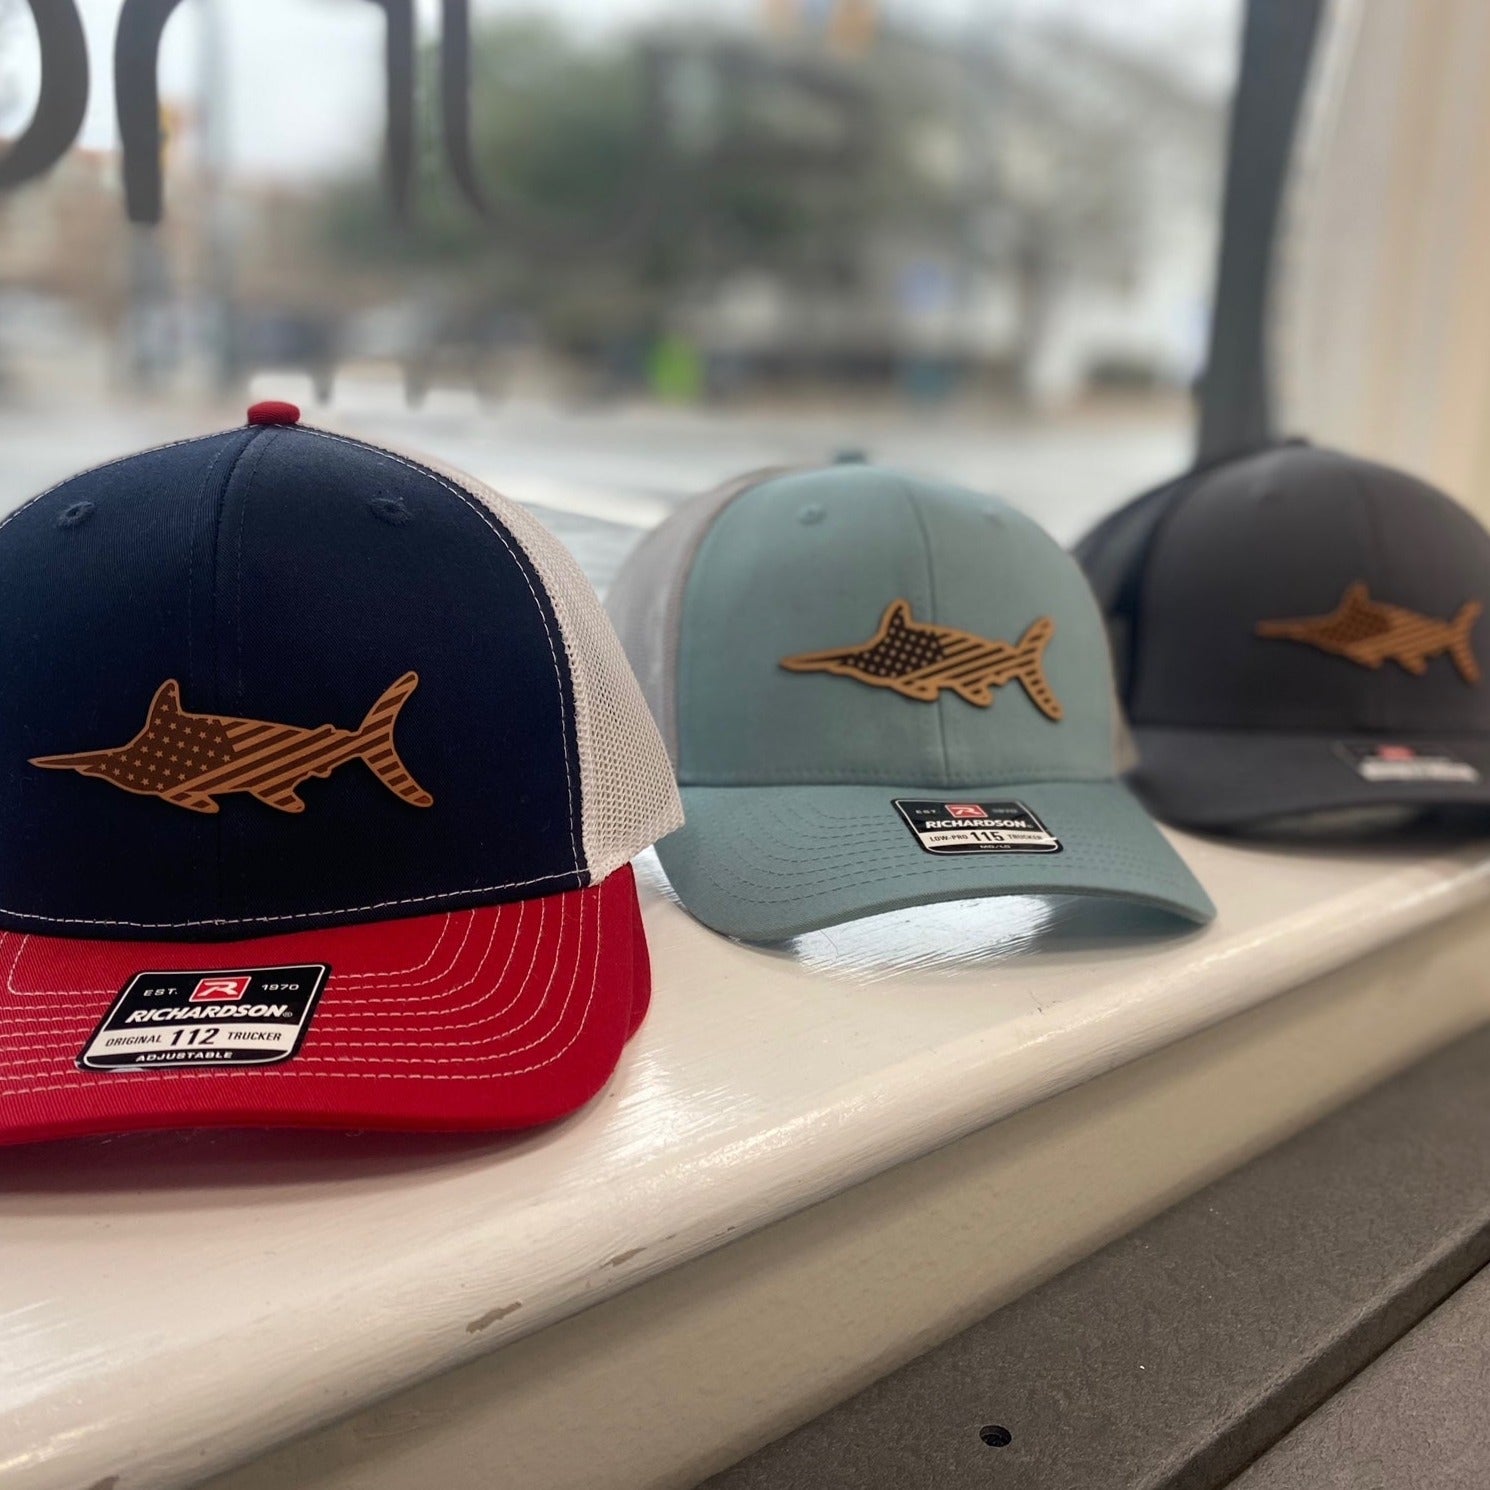 Three different styles of Marlin hat sitting in a window. 